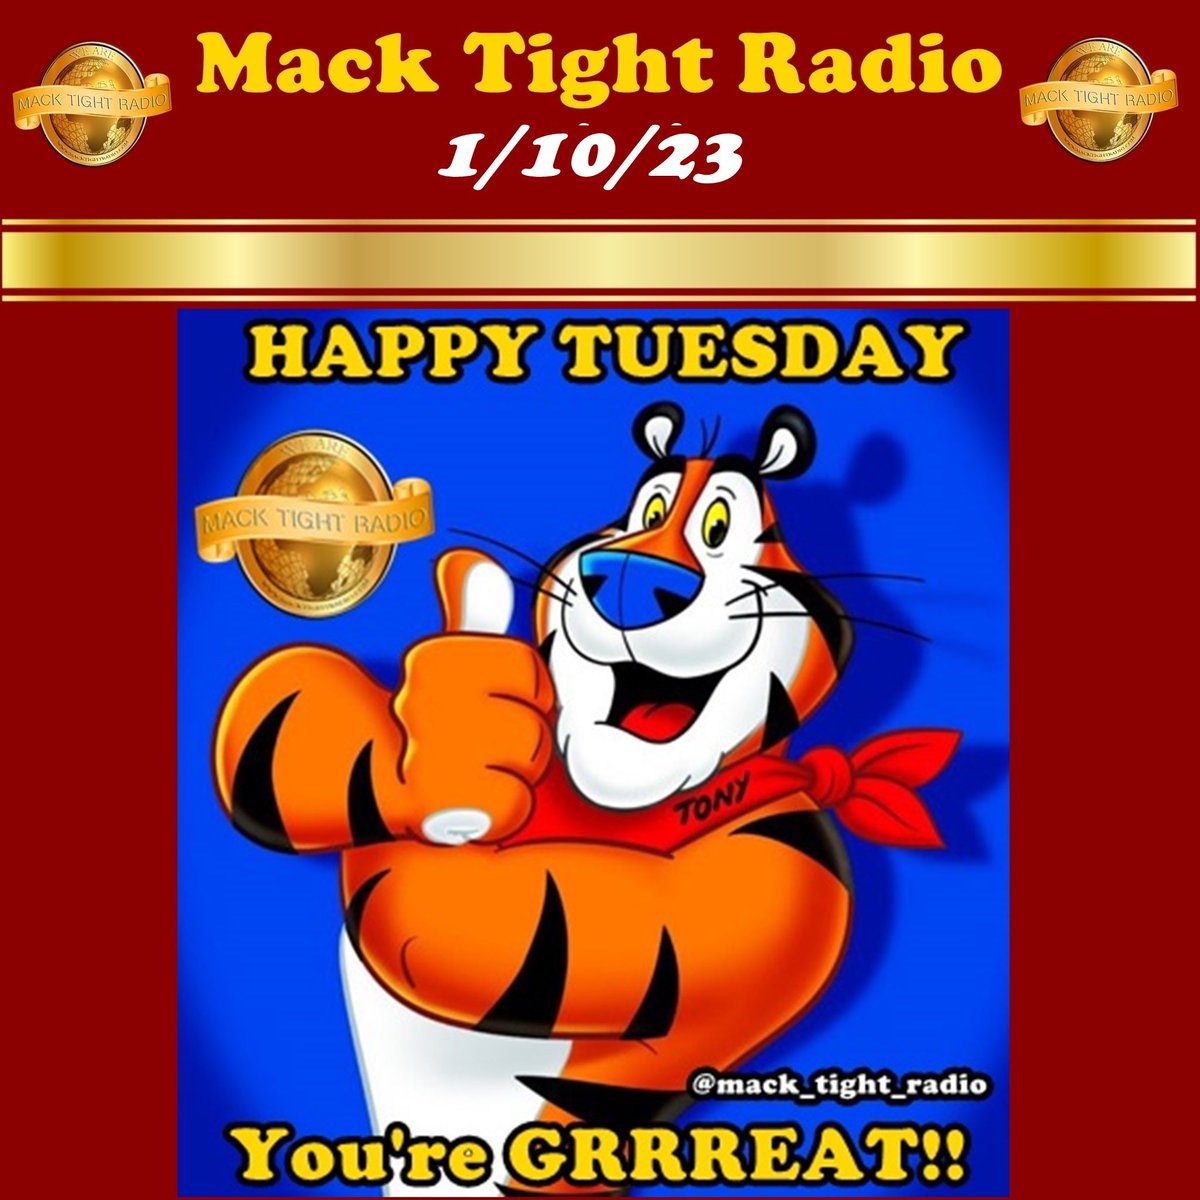 Good morning‼️🌞 Time To Look ALIVE, Look ALIVE 😜😜 Issa #Tuesday aka #TouchUpTuesday ⚌ 4 Steps Away From The #Weekend🤘🤘 Lets #GetIt 😎😎 Time To Get Up ❌ Get Out ❌ Go Hard ❌ #SecureThaBag 💰💰 💪💪 Be #Terrific Today! 👍👍 - #MackTightRadio